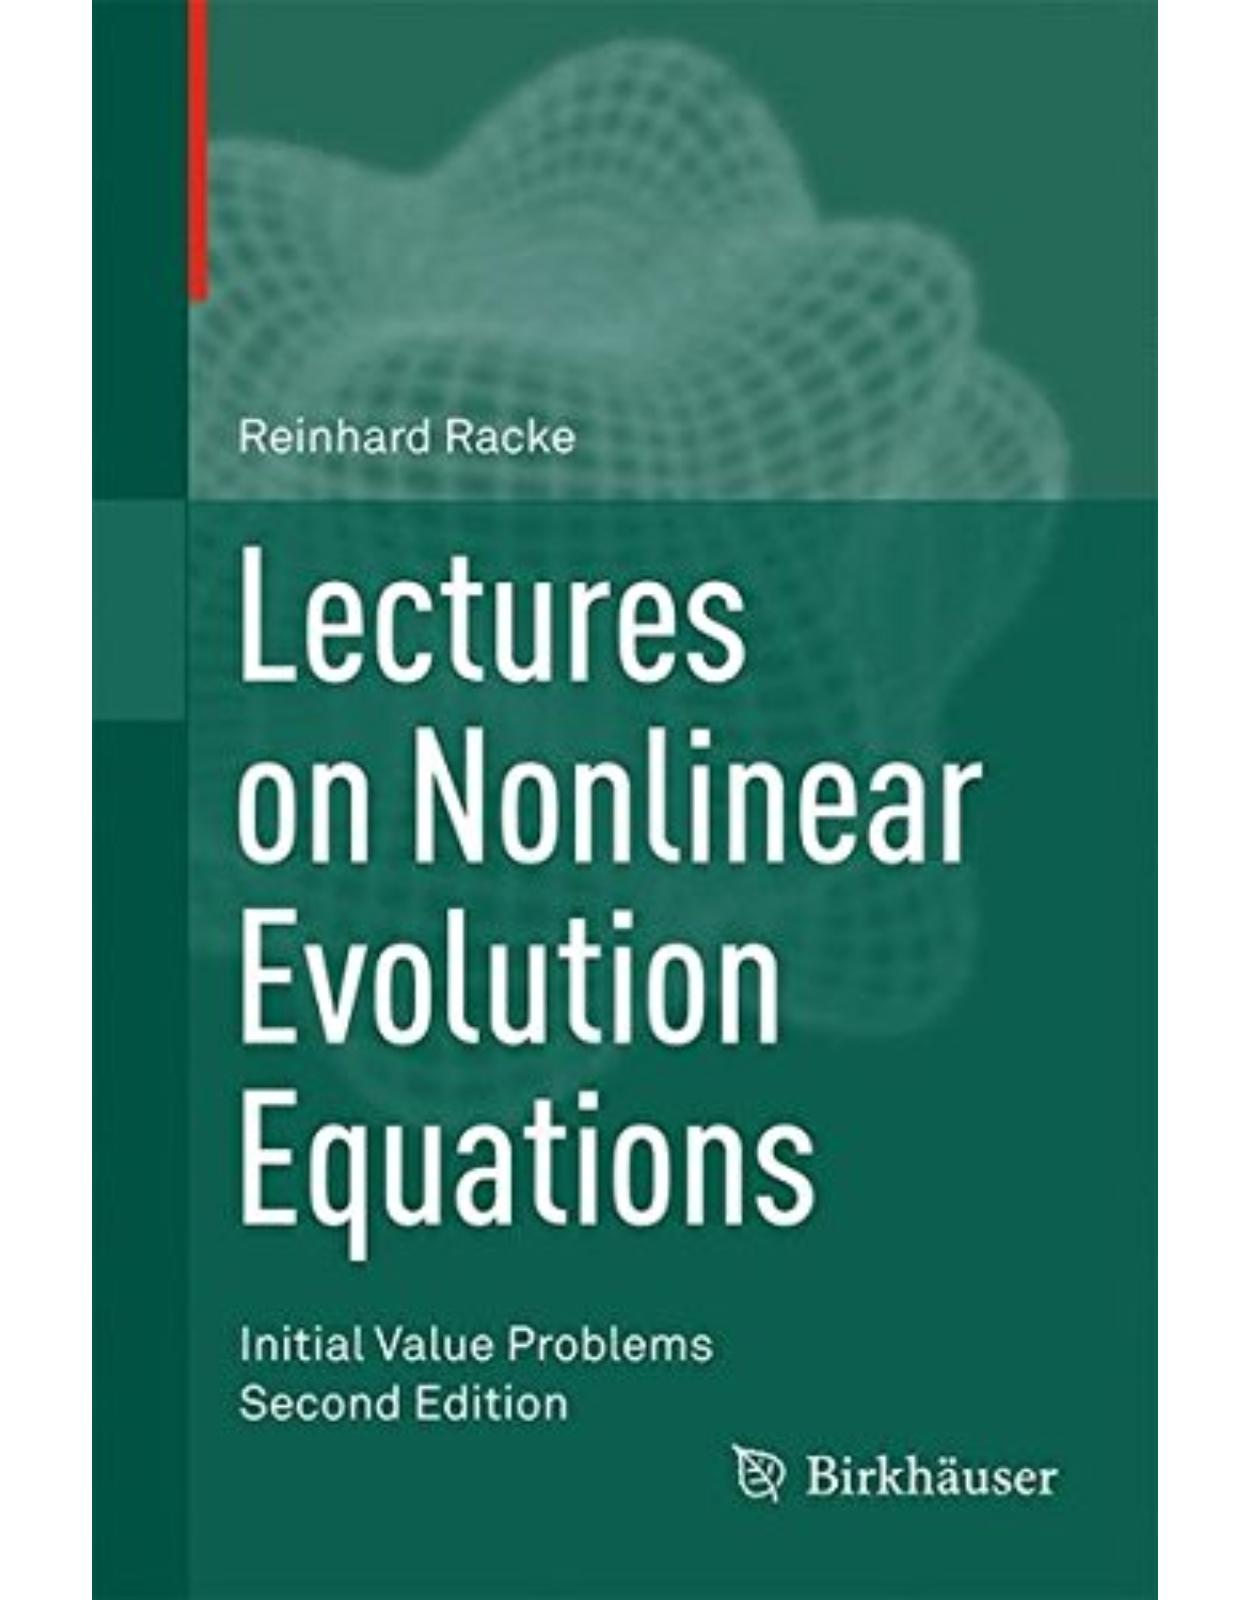 Lectures on Nonlinear Evolution Equations: Initial Value Problems